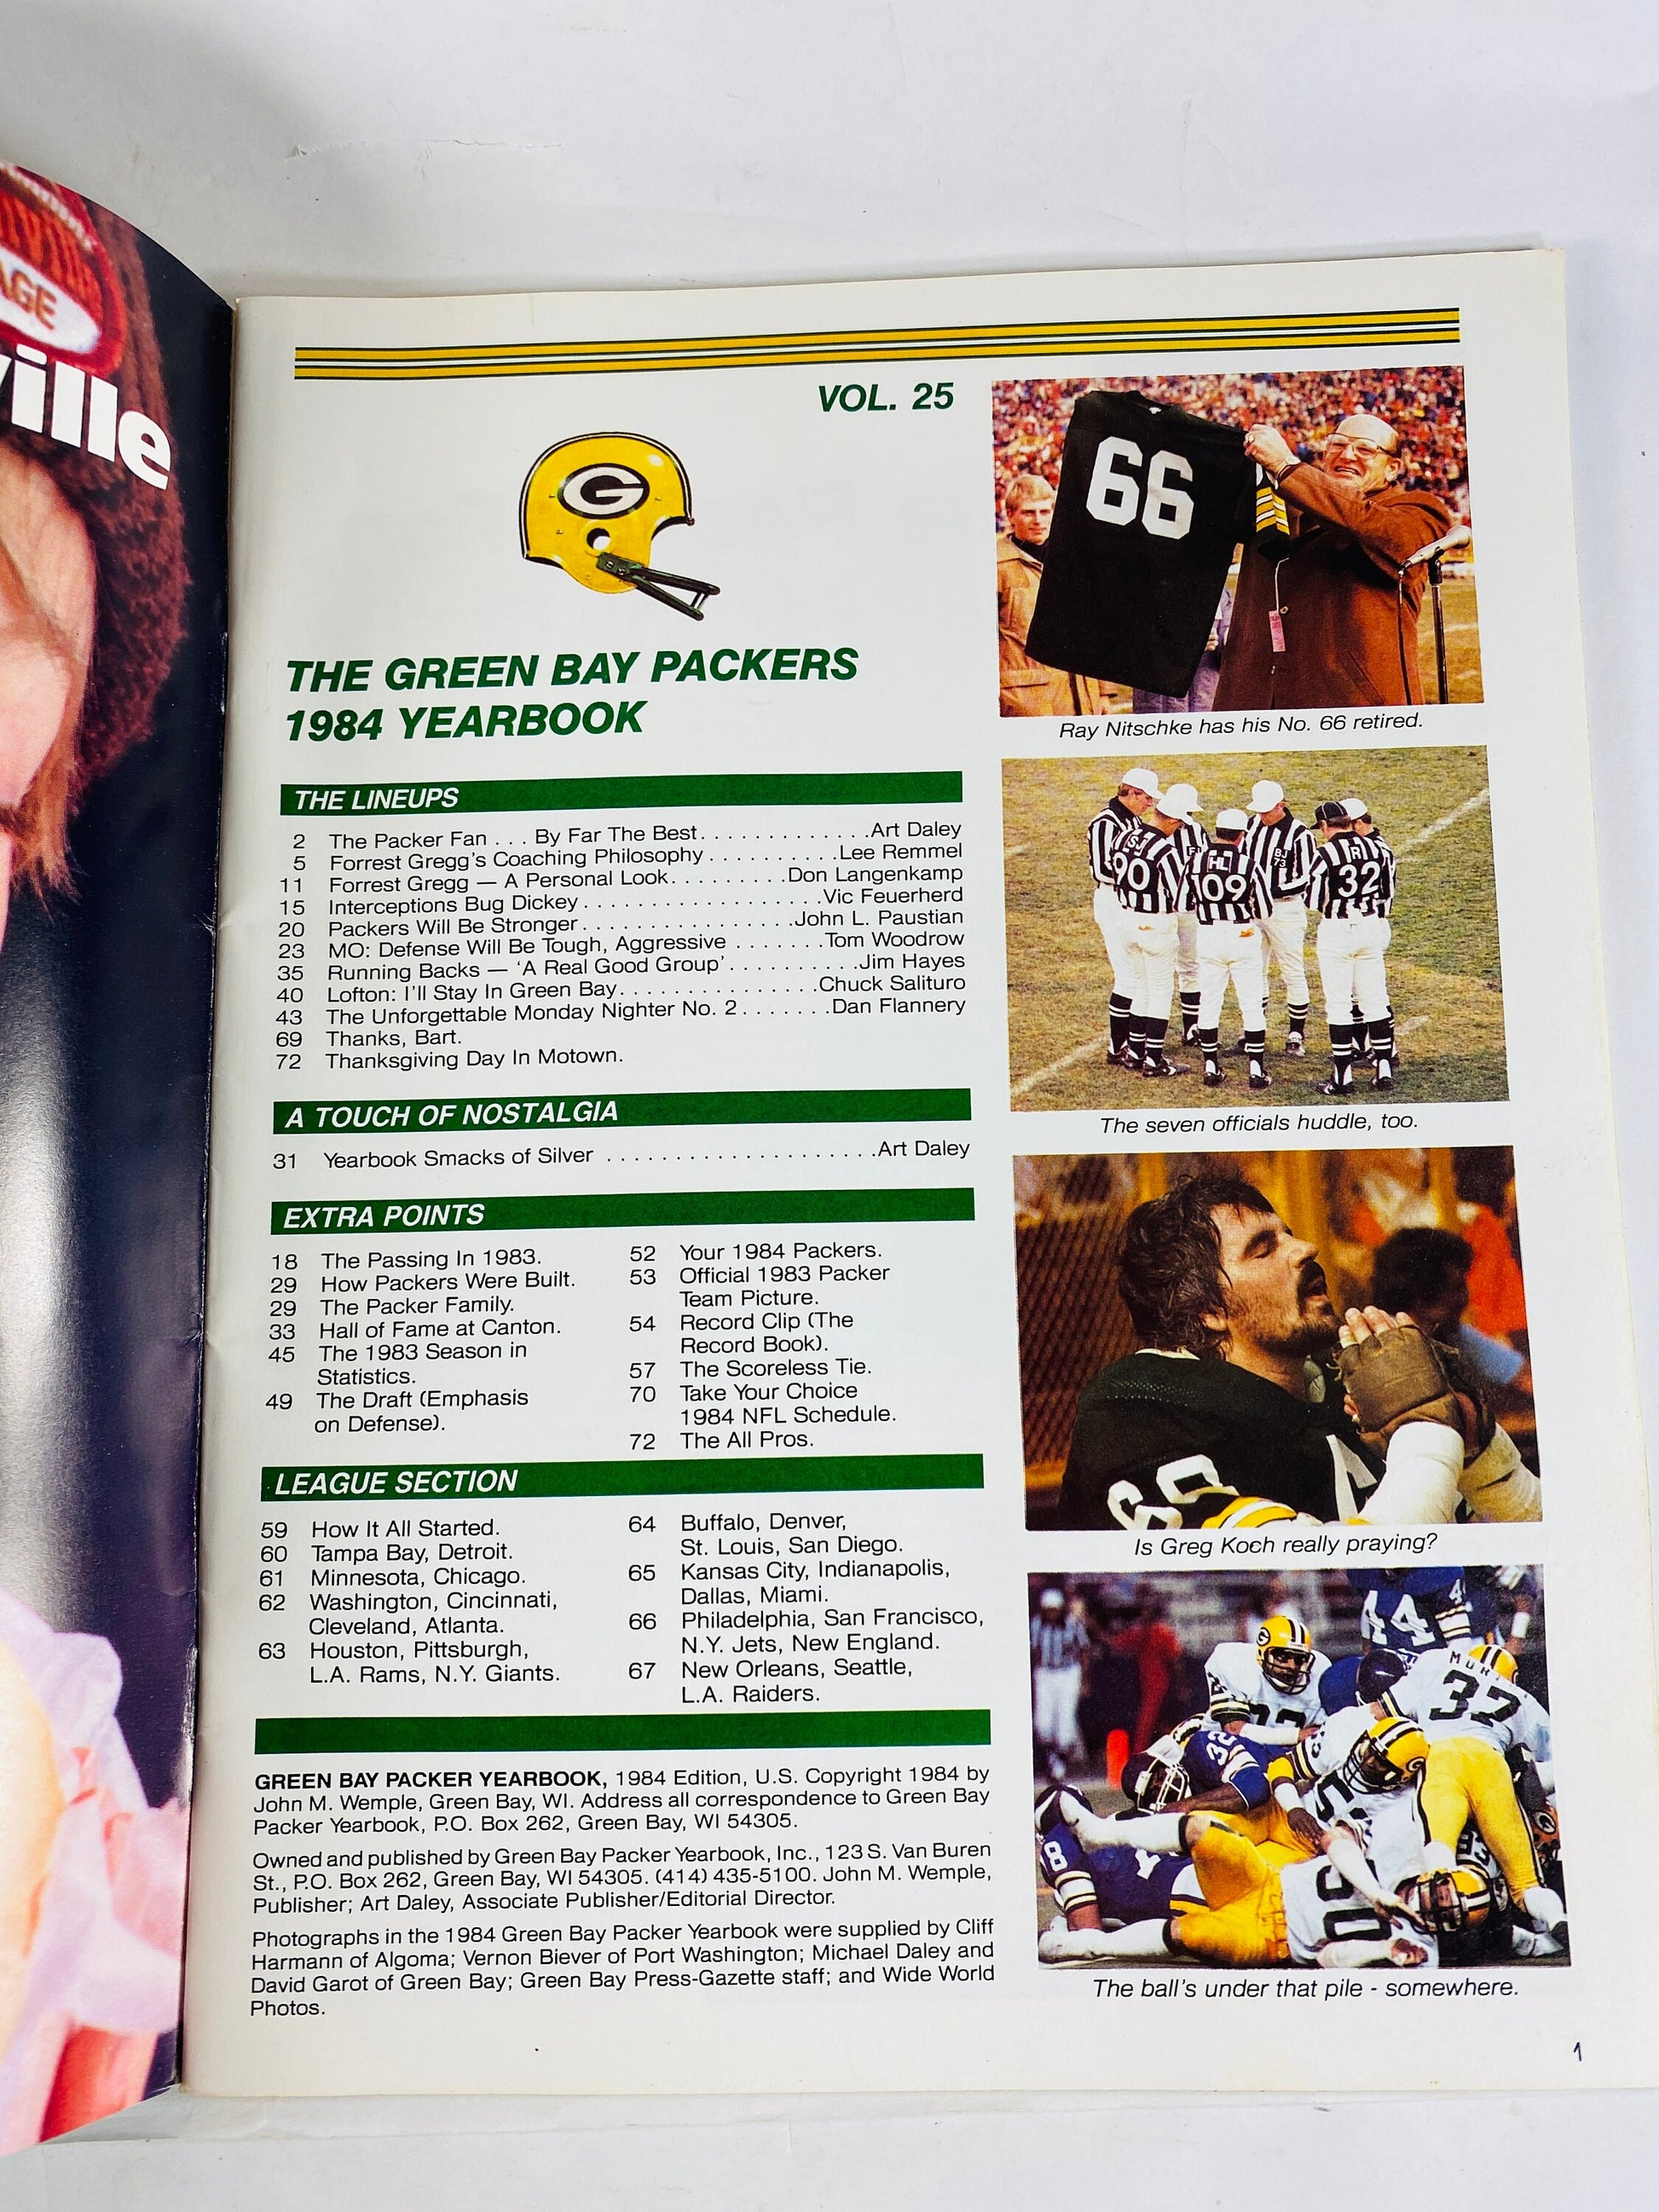 1984 Green Bay Packers vintage yearbook Wisconsin football memorabilia collector magazine with photos, team lineup stories and schedule